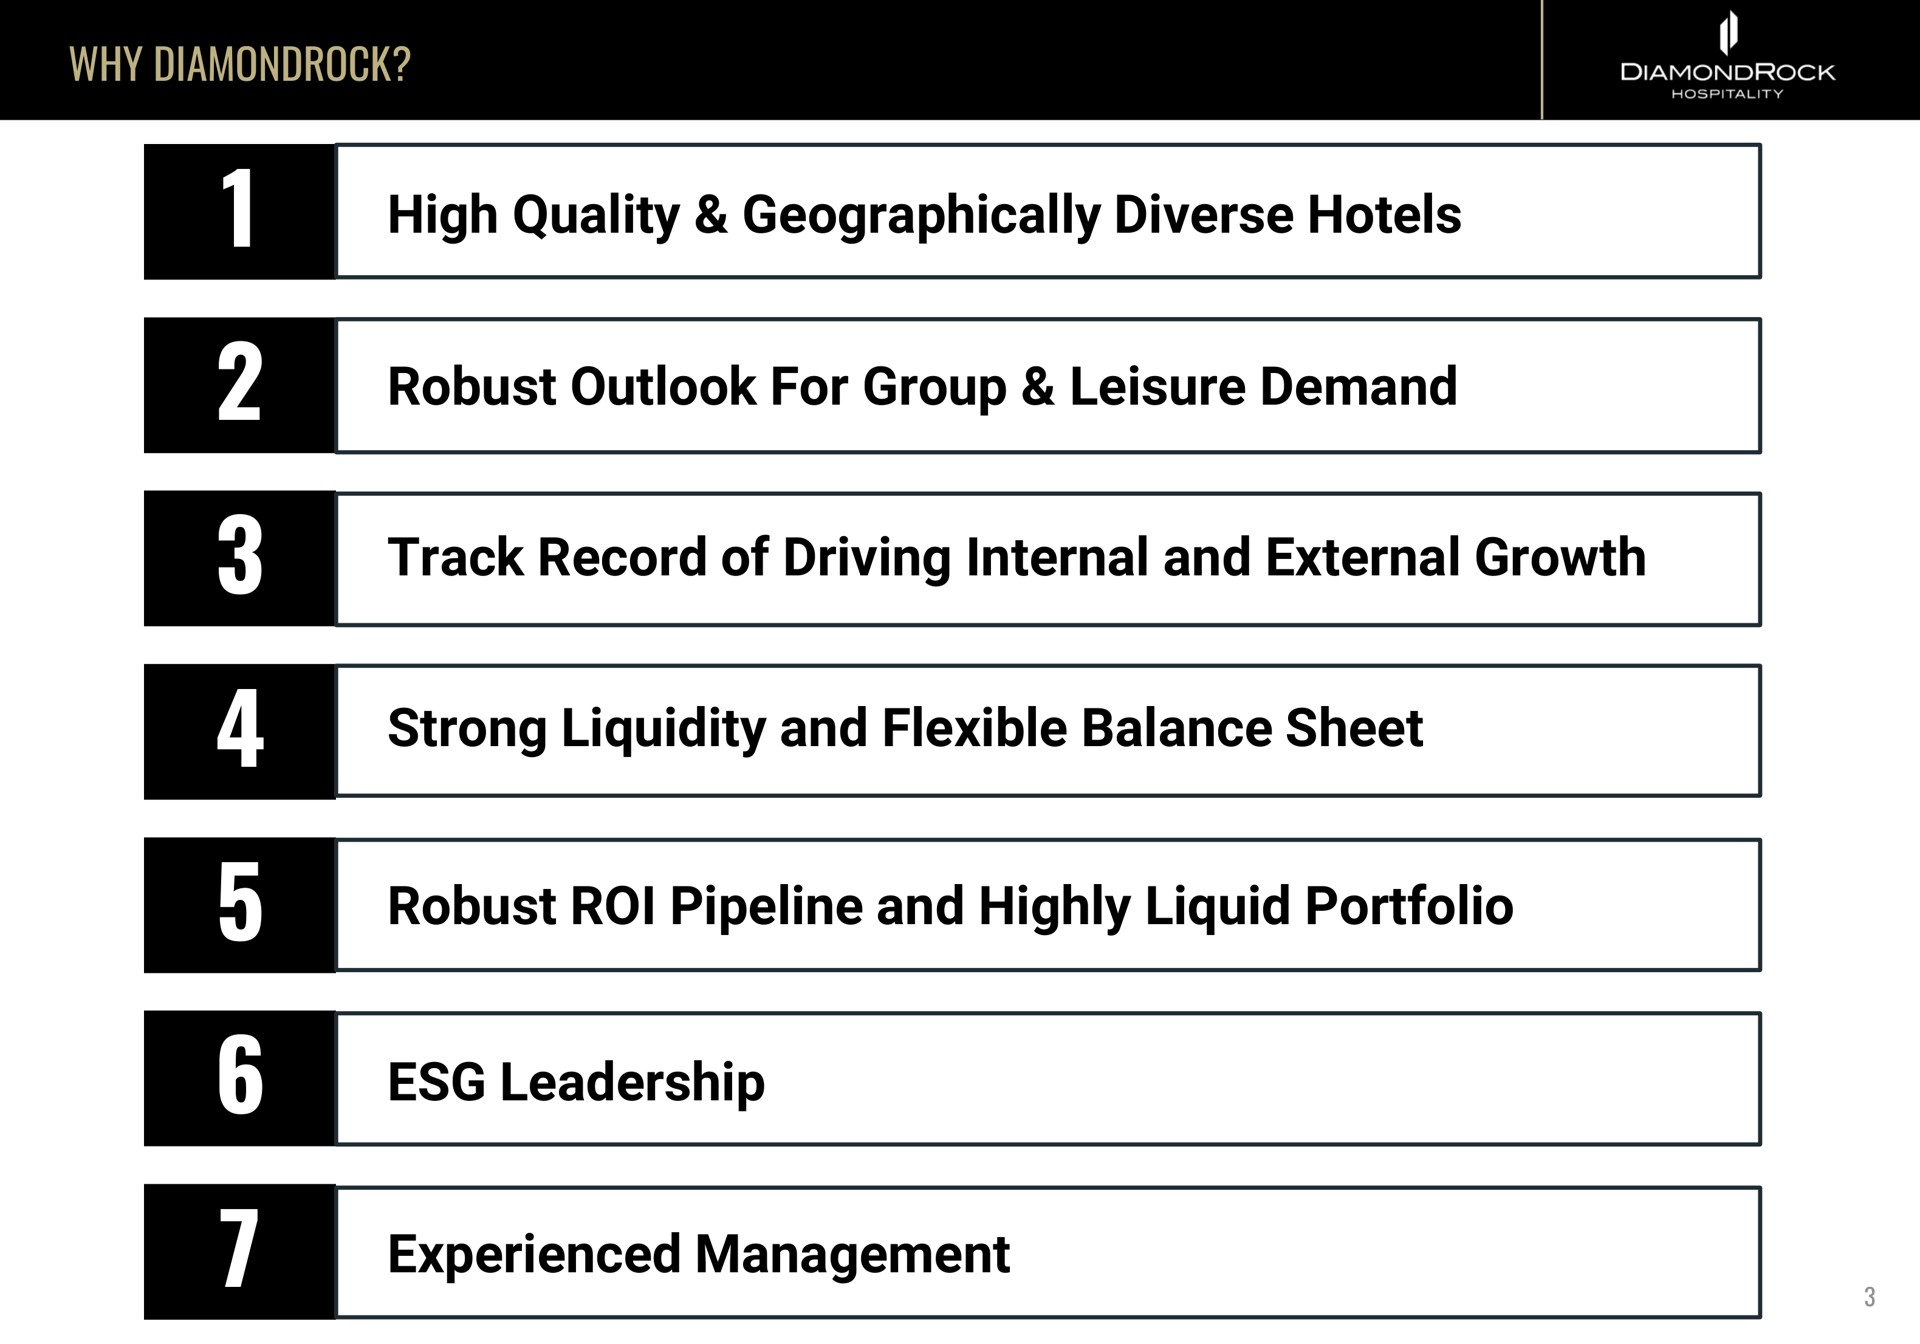 why high quality geographically diverse hotels robust outlook for group leisure demand track record of driving internal and external growth strong liquidity and flexible balance sheet robust roi pipeline and highly liquid portfolio leadership experienced management on cole rock i | DiamondRock Hospitality